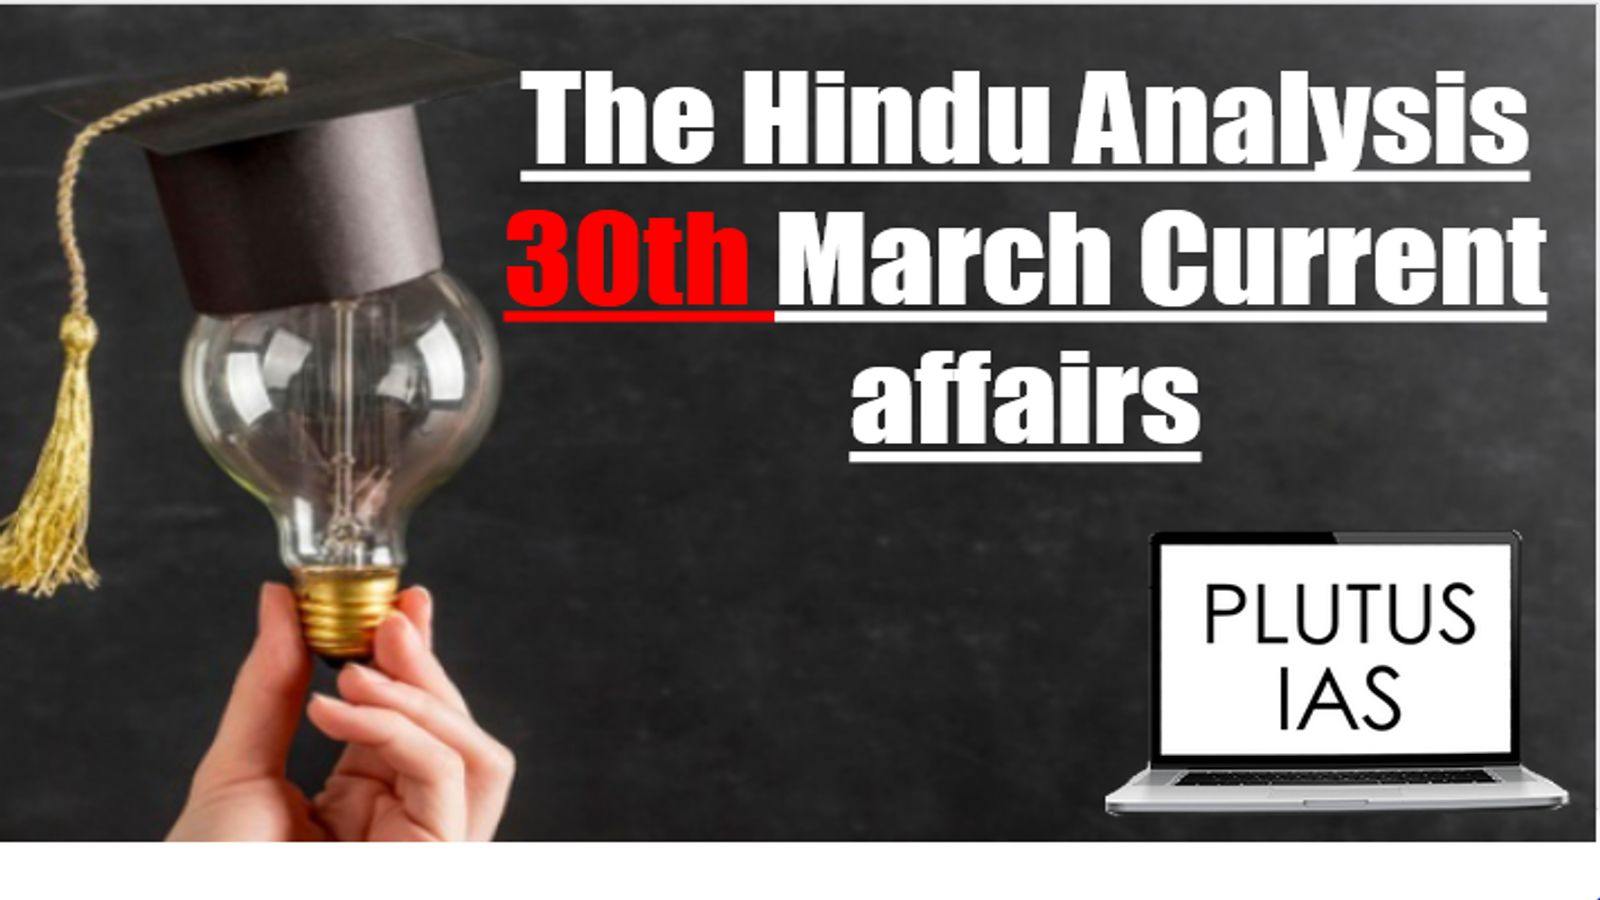 The Hindu Analysis 30 March Current Affairs